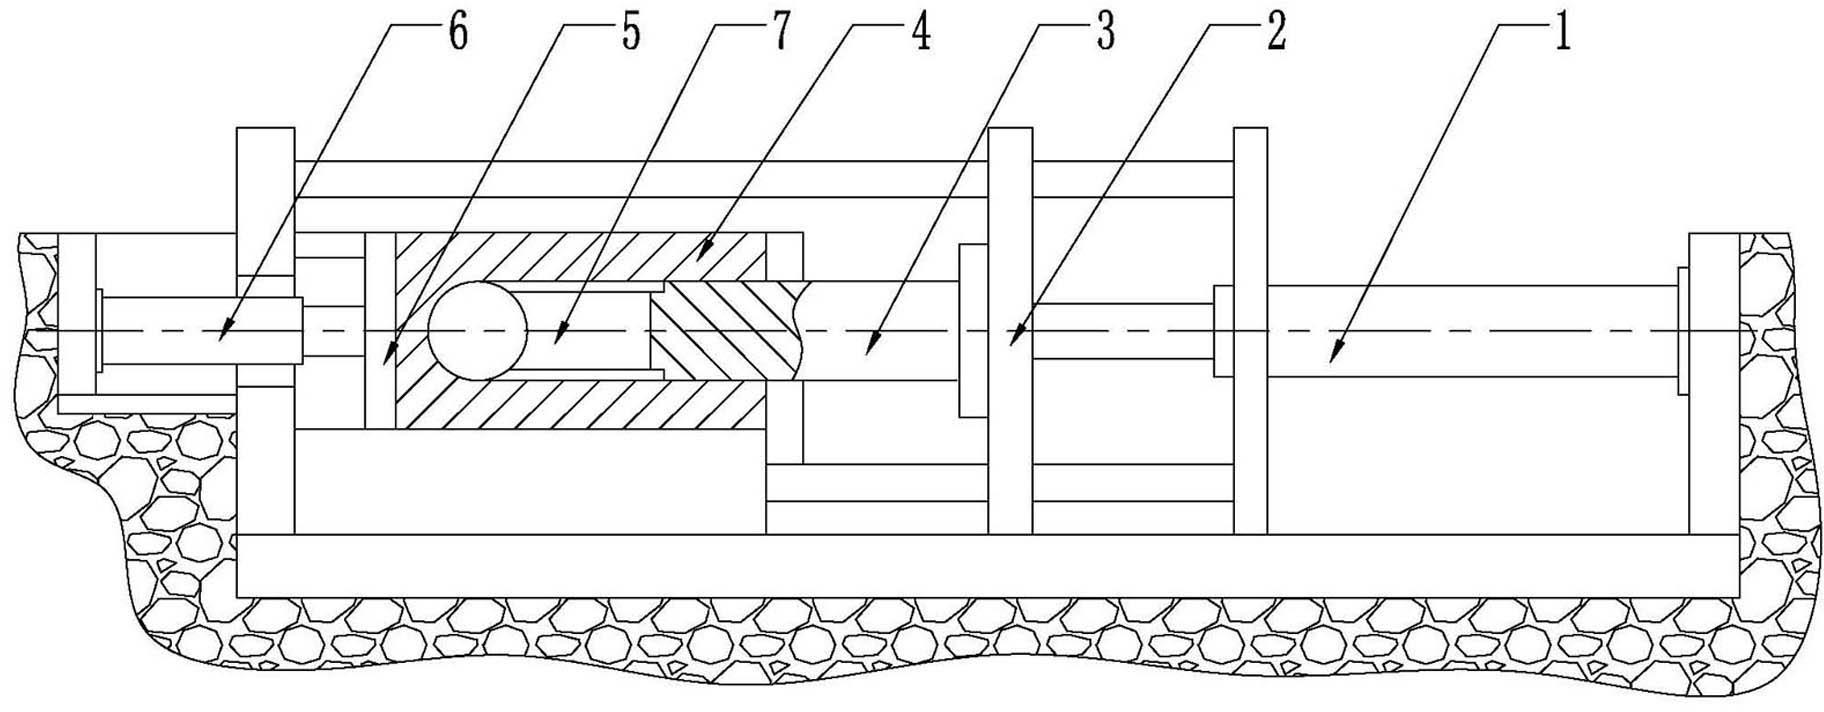 Heat-push bending method for producing pipe fittings with equal diameters and equal wall thicknesses